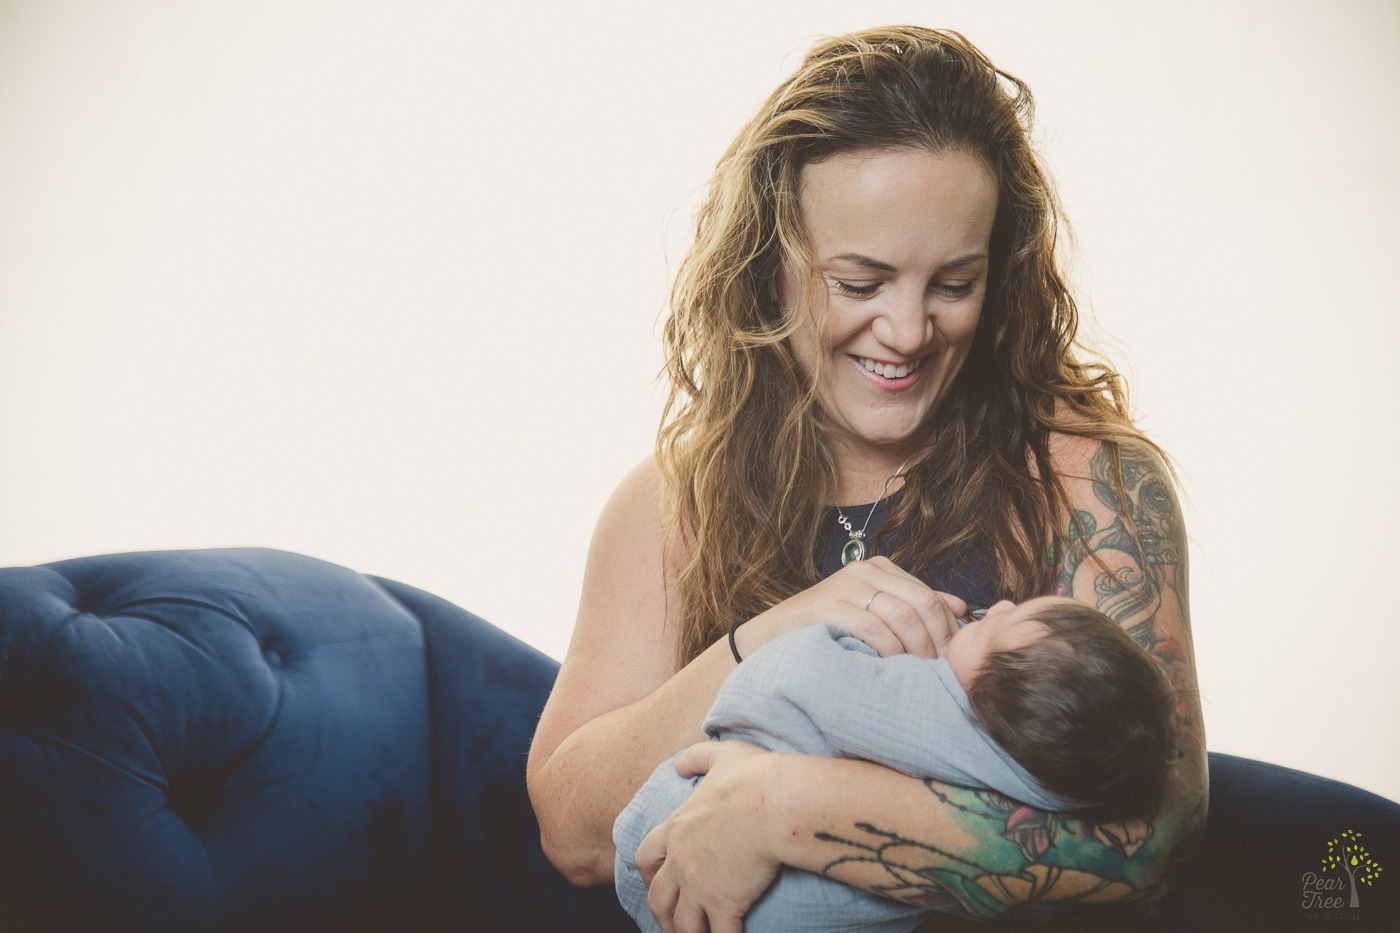 Young grandma with tattooed sleeve on upper arm holding her newborn grand daughter and smiling